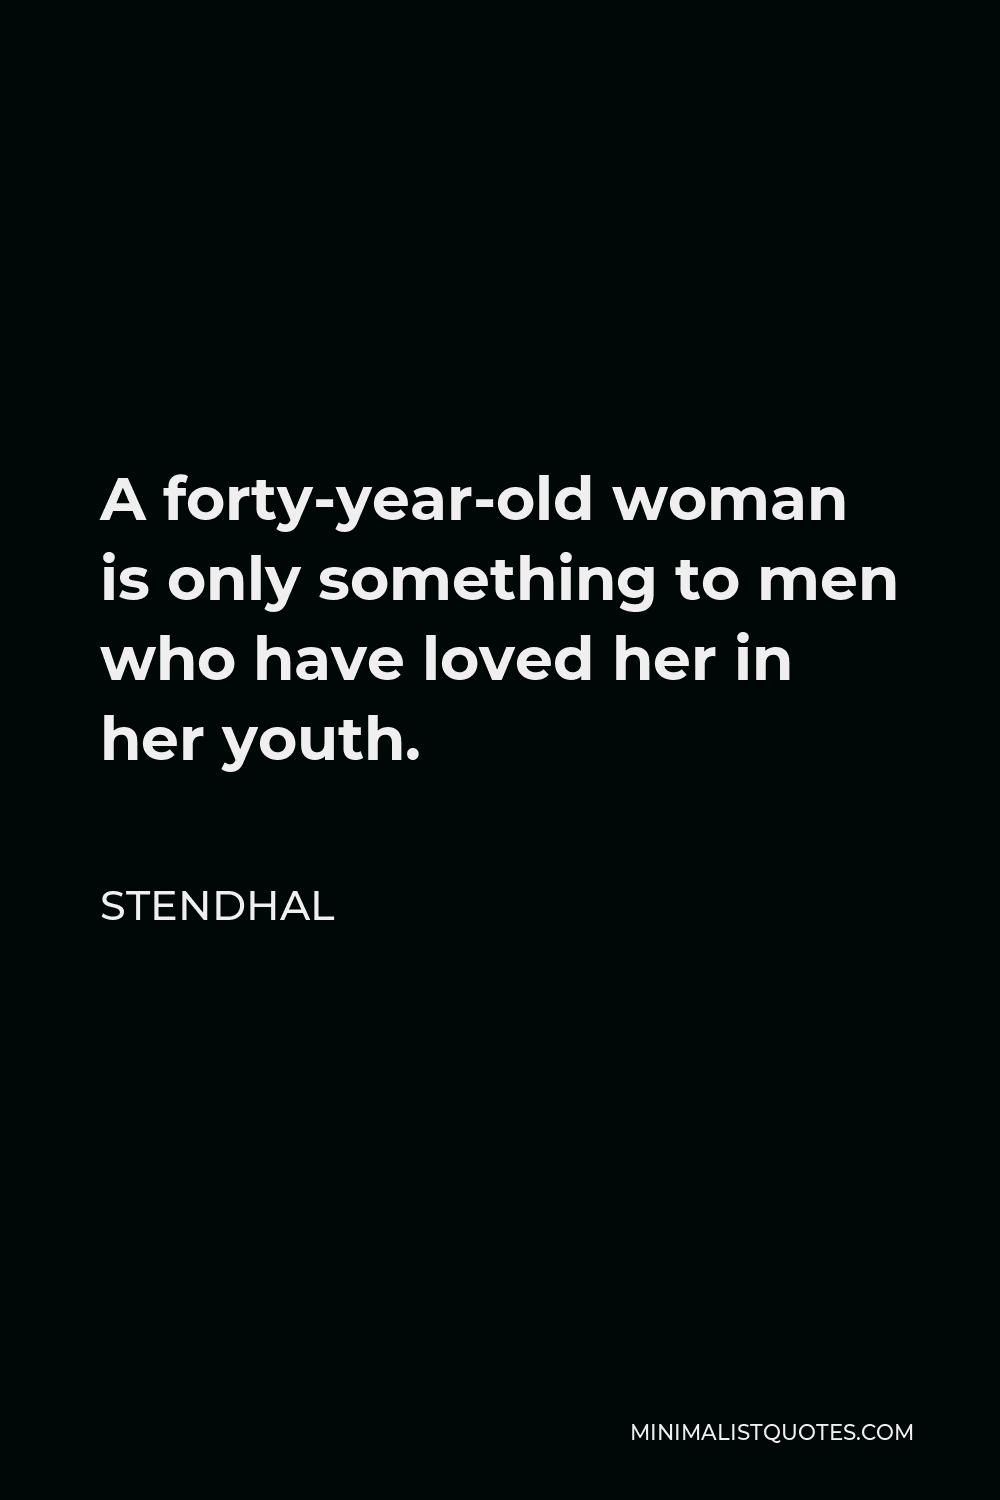 Stendhal Quote - A forty-year-old woman is only something to men who have loved her in her youth.